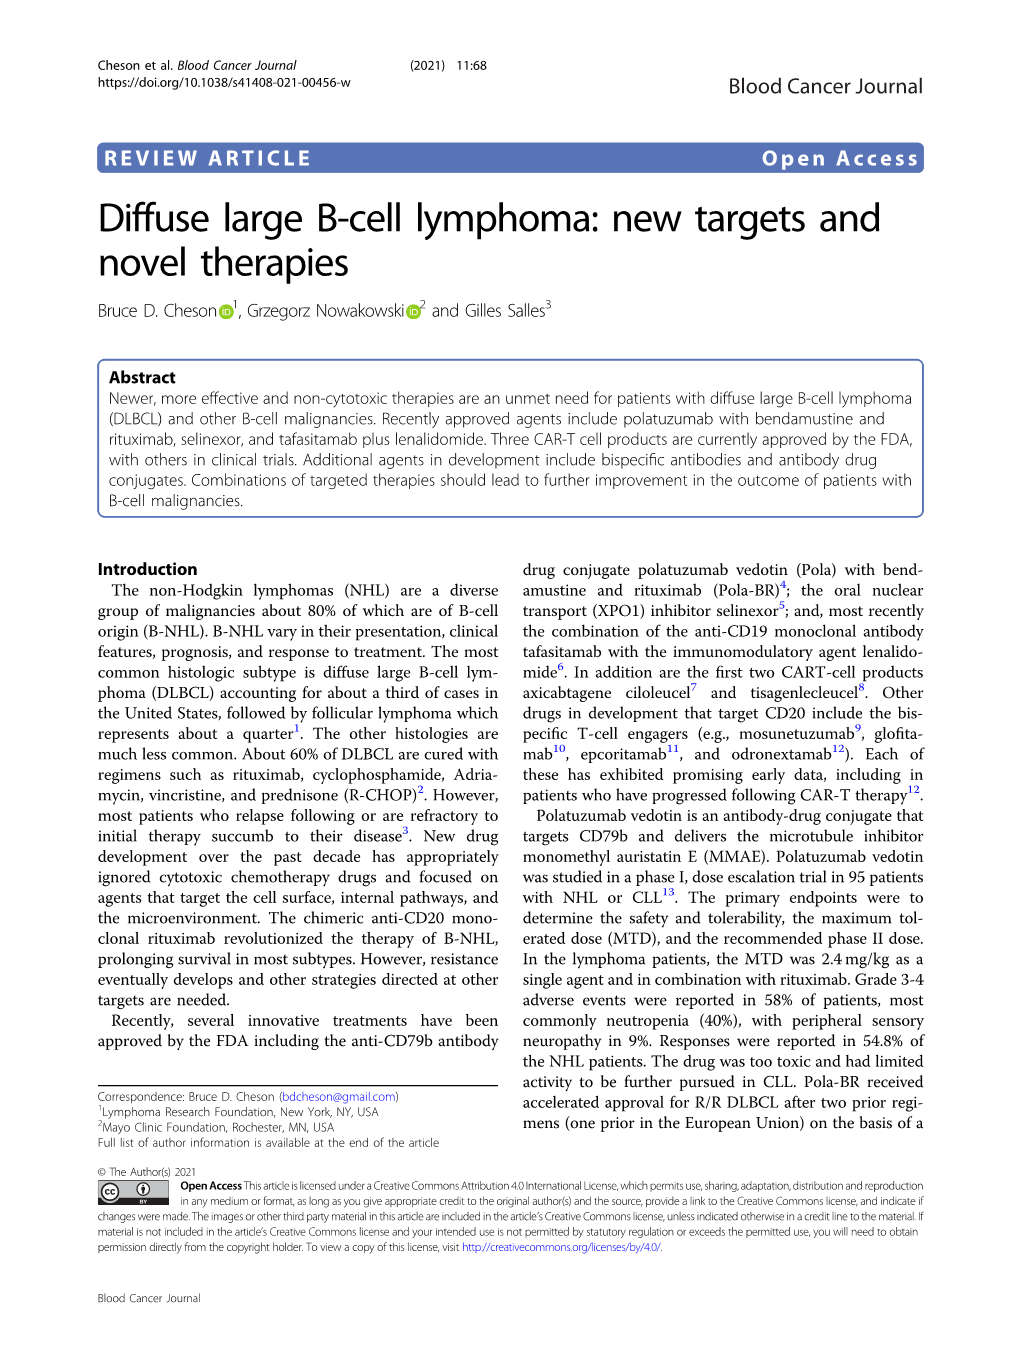 Diffuse Large B-Cell Lymphoma: New Targets and Novel Therapies Bruce D